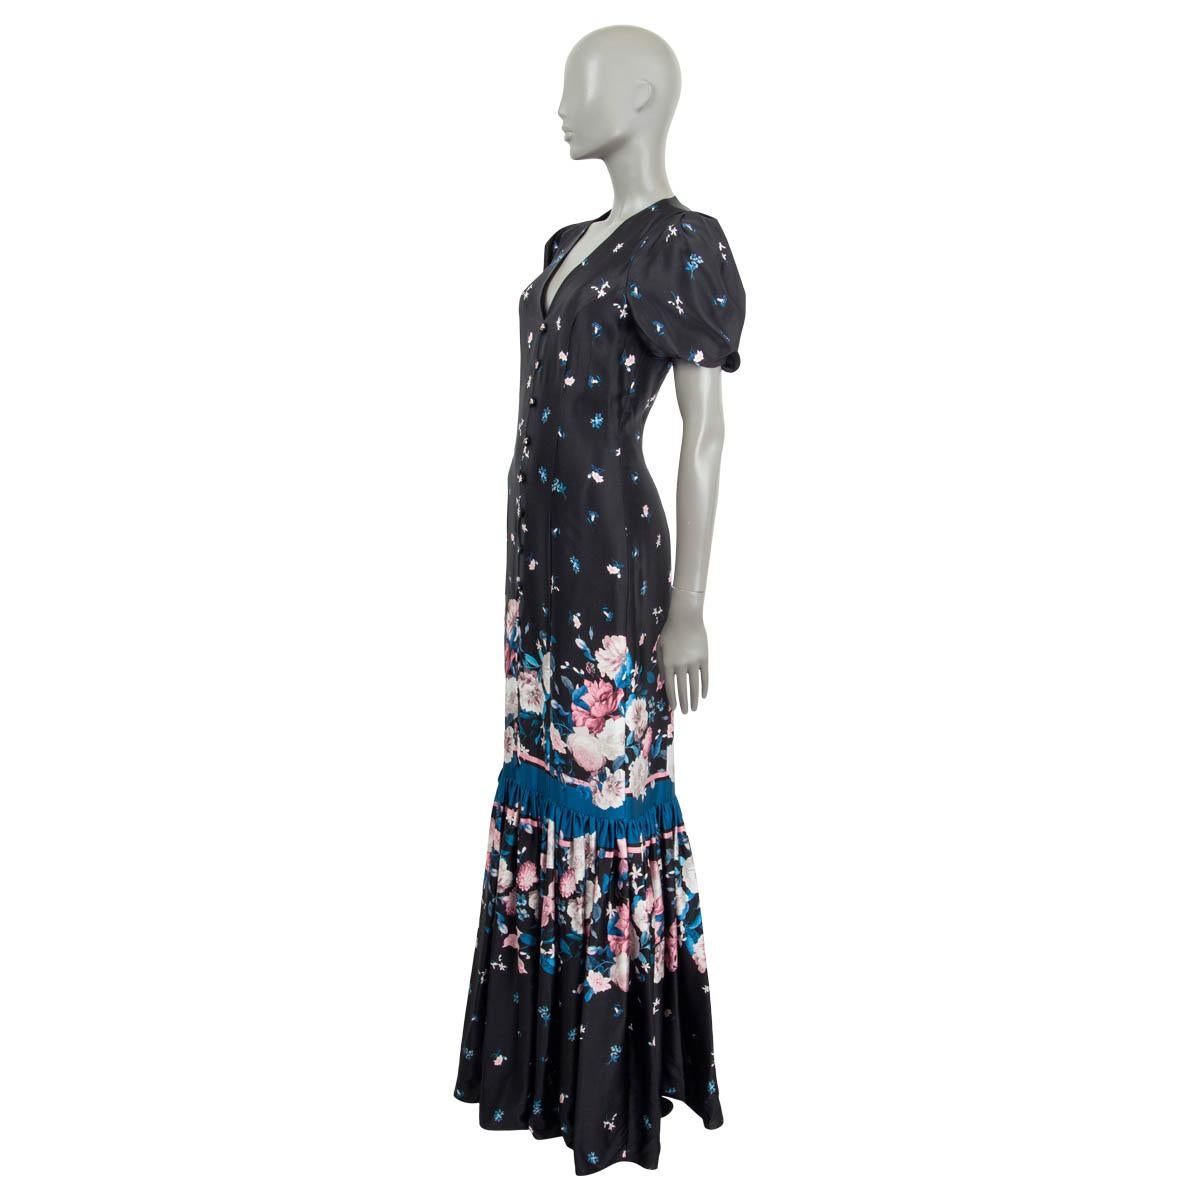 100% authentic Erdem 'Rosetta' satin dress in black, blue, pink and dusty rose silk (100%). Features gathered short sleeves and a flared hem. Has a floral print all over and button details at the front. Opens with a concealed zipper at the back.